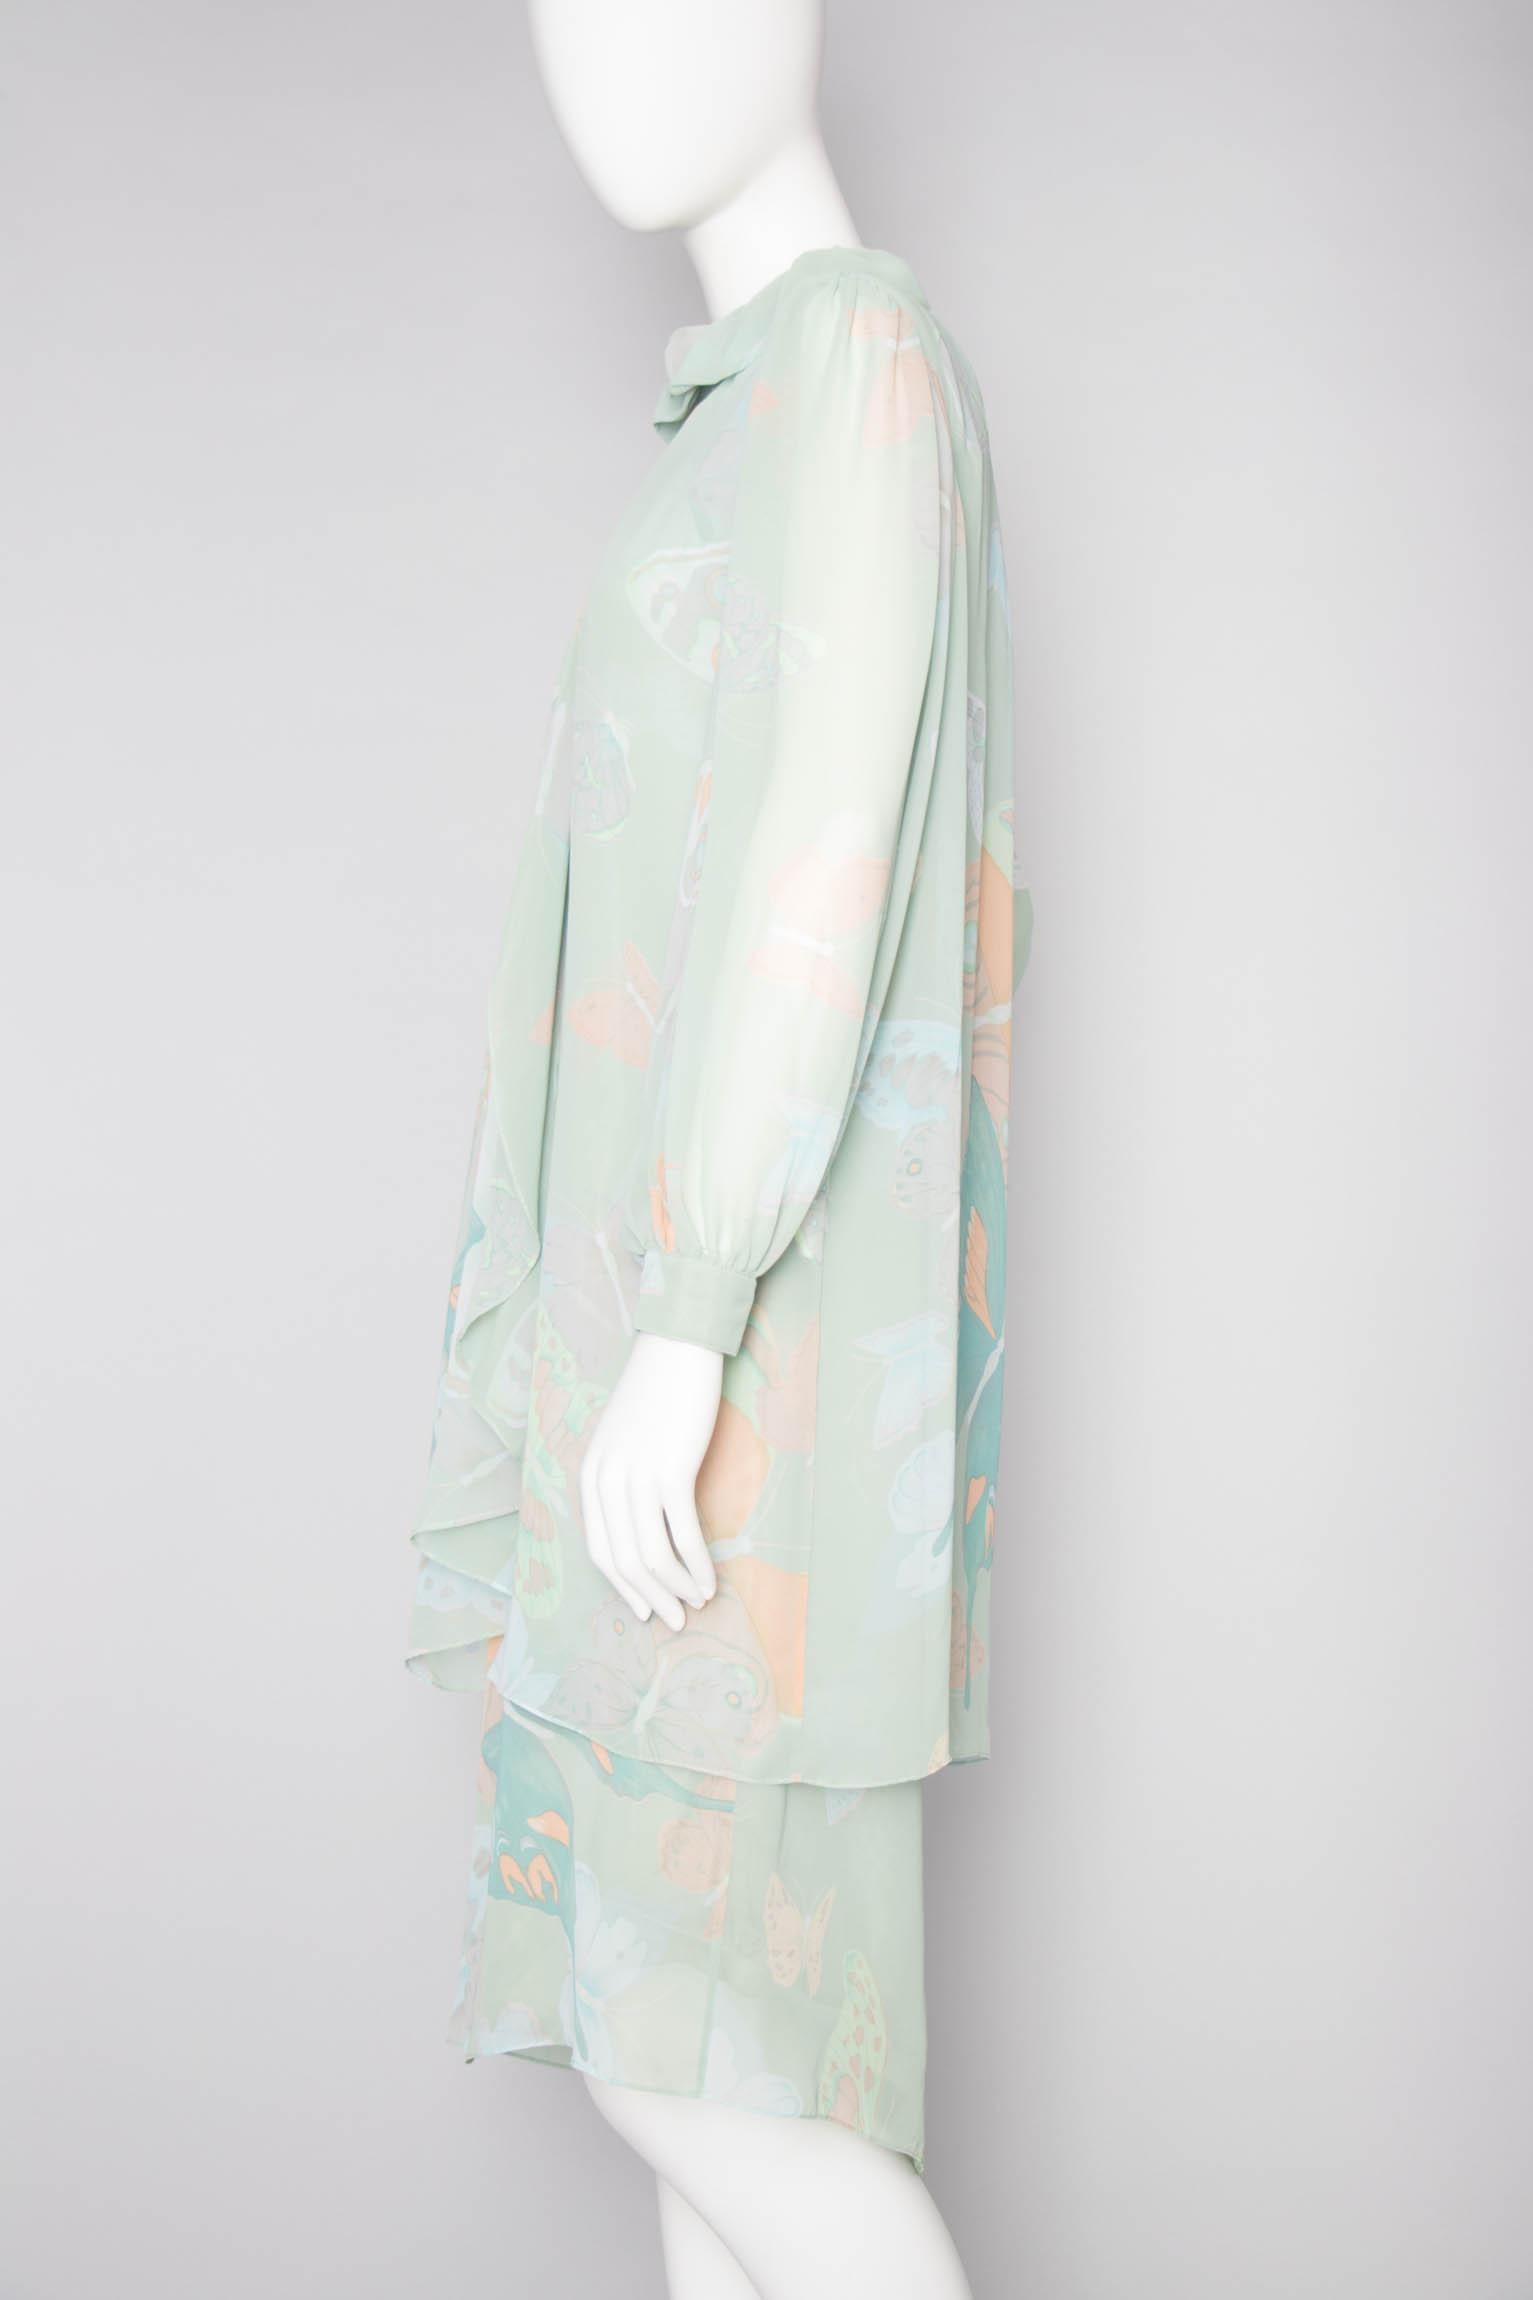 A 1970s Hanae Mori two-piece ensemble consisting of a classic shift dress and delicate overcoat. The sleeveless dress as a sweetheart neckline and back zipper and hook & eye closure. The sheer overcoat has a ruffle collar and a flowy waterfall